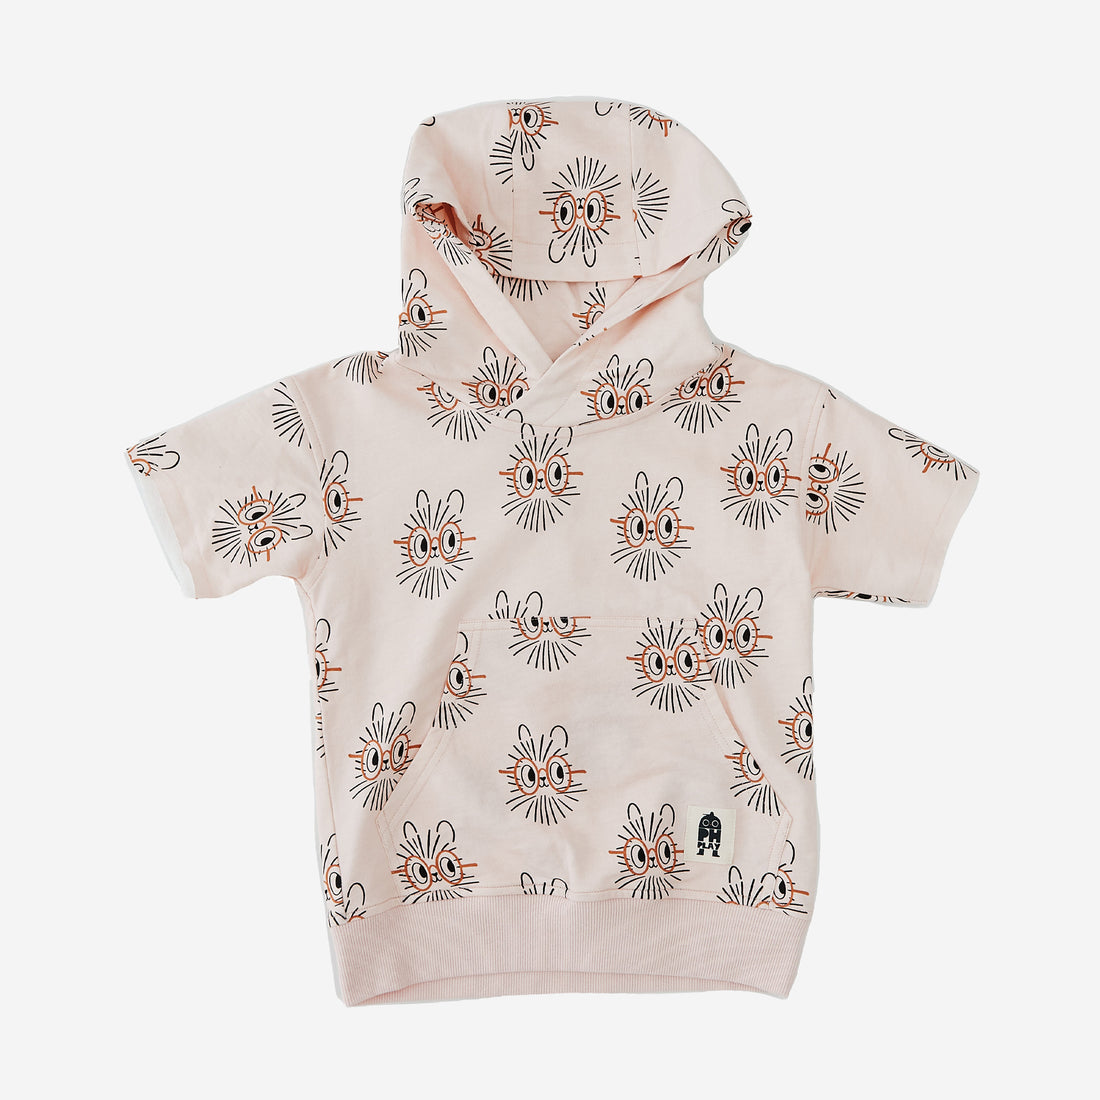 The Hedgehog short sleeve Print Hoodie has a light peach background with Hedgehog abstract faces with a cute orange eye glasses. the hoodie has an attached hat and kangaroo pocket.